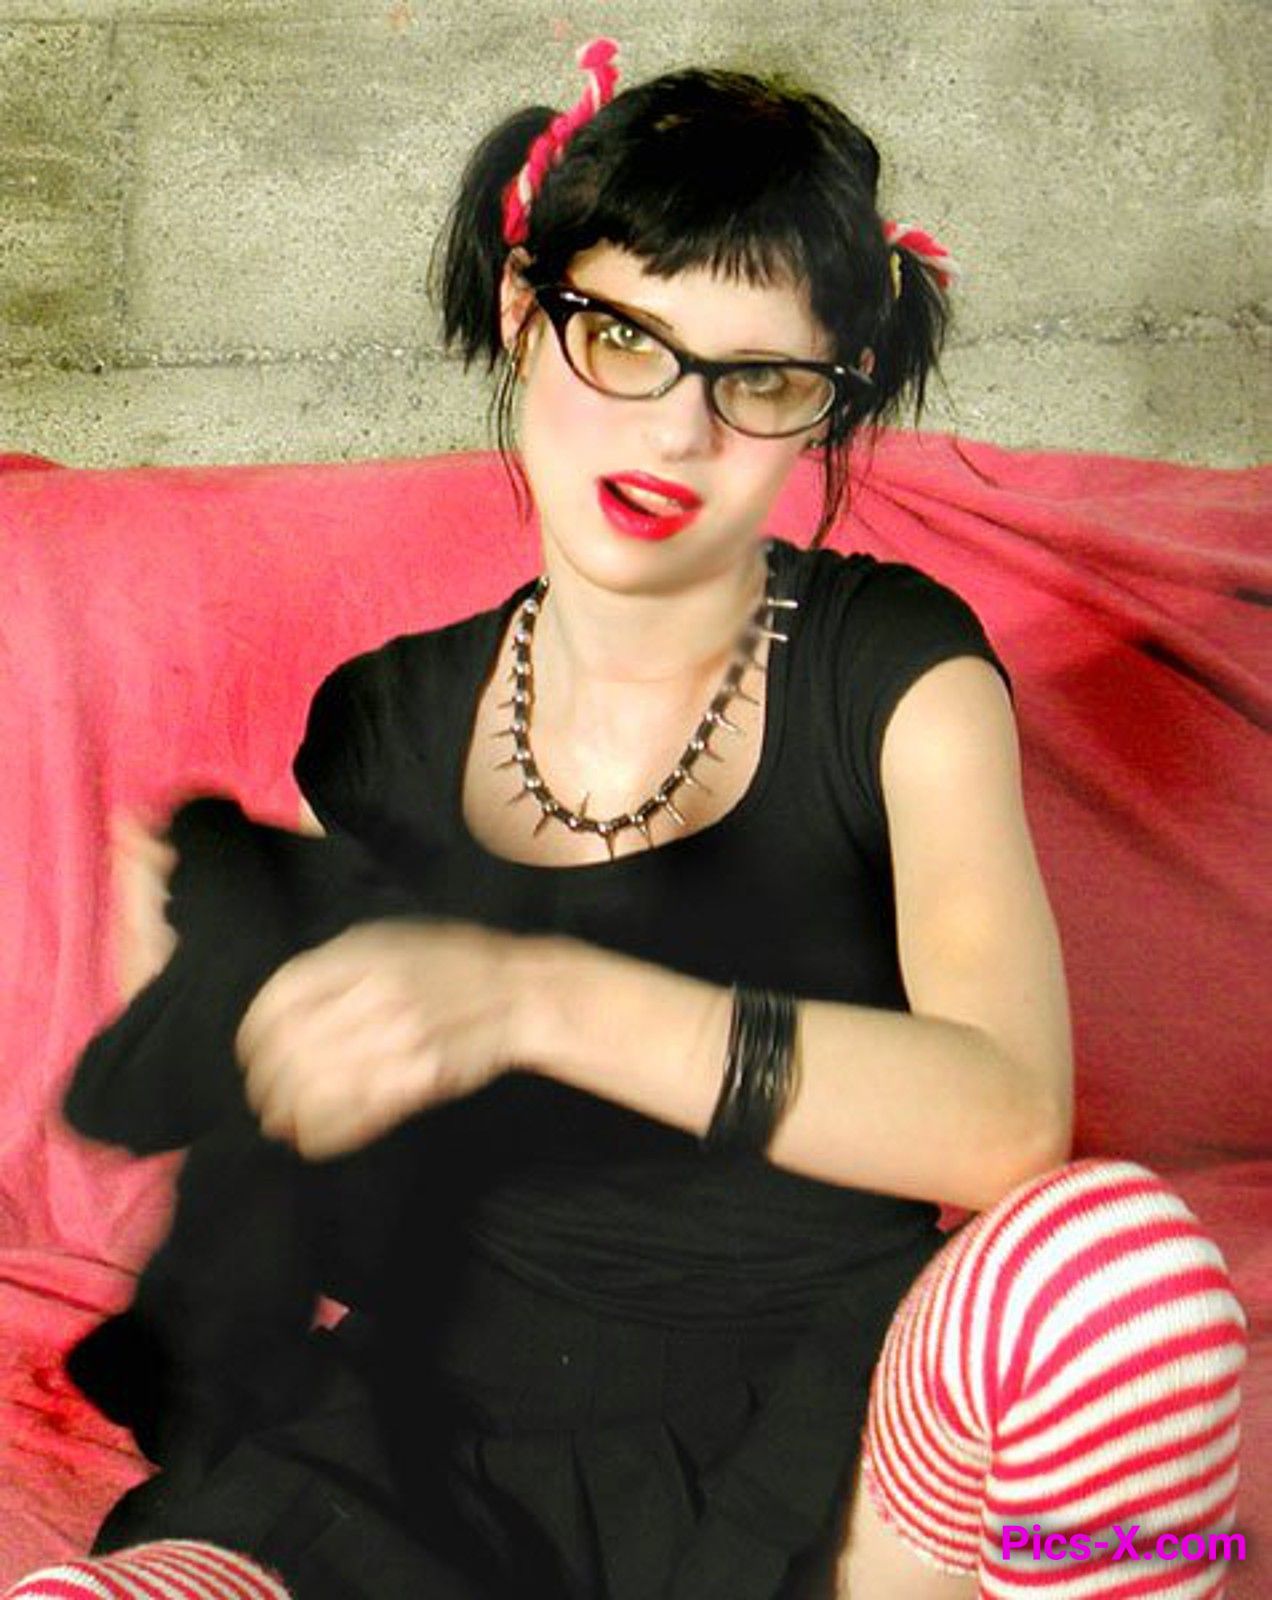 Pigtailed goth girl doign herself with a slim pink vibrator - Punk Rock Girlfriend - Image 1